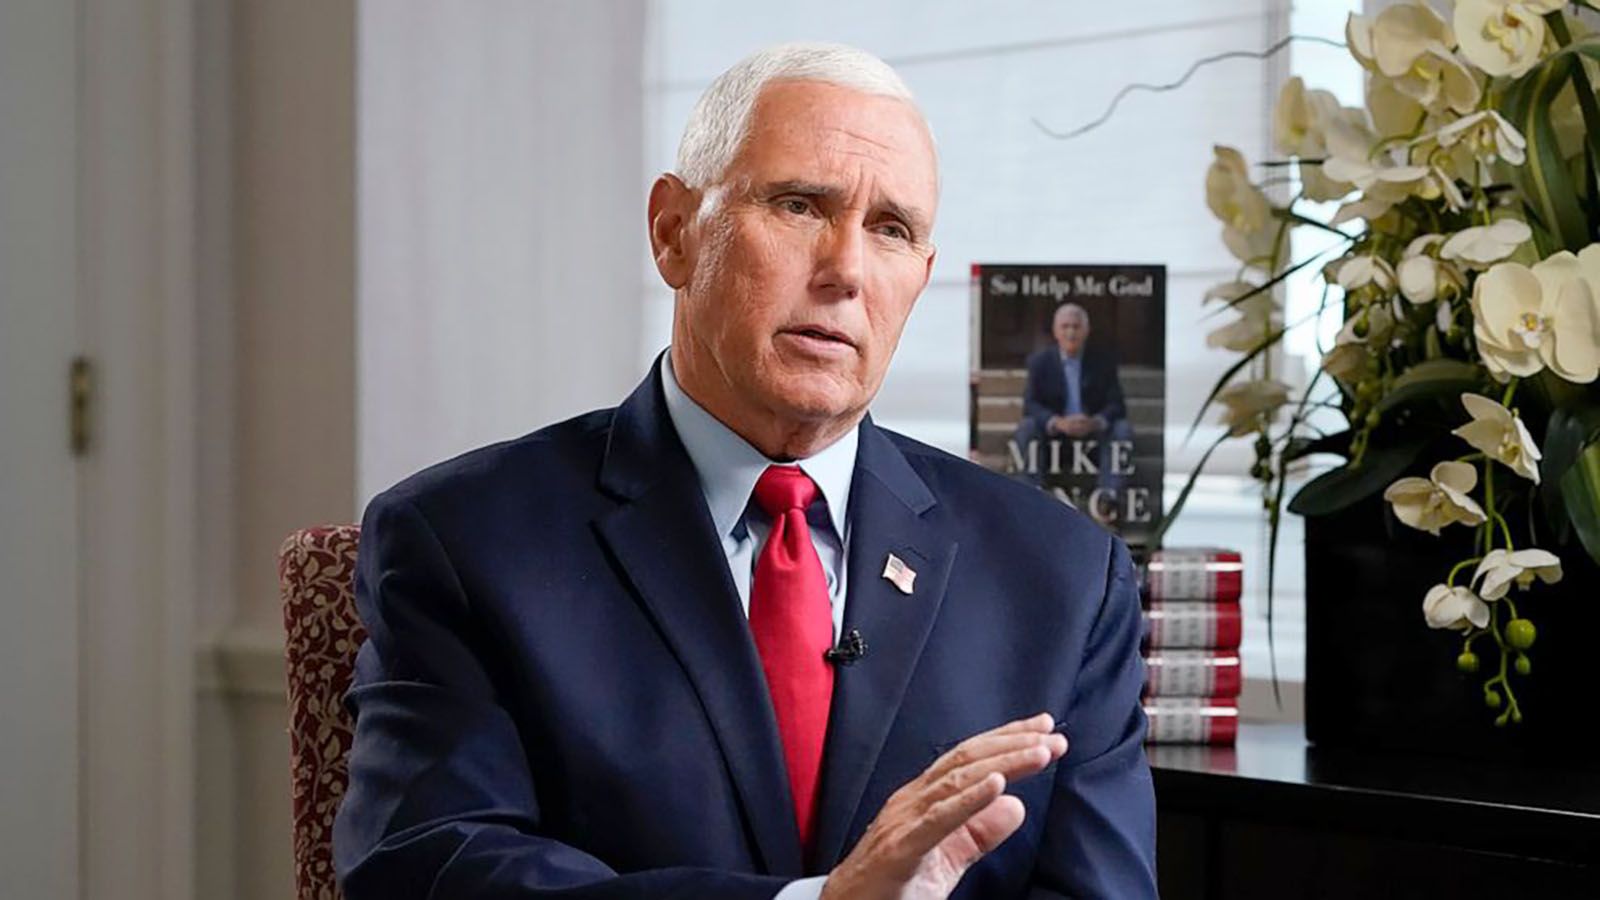 Mike Pence will be at The Clyde on Dec. 21 to sign copies of his book.